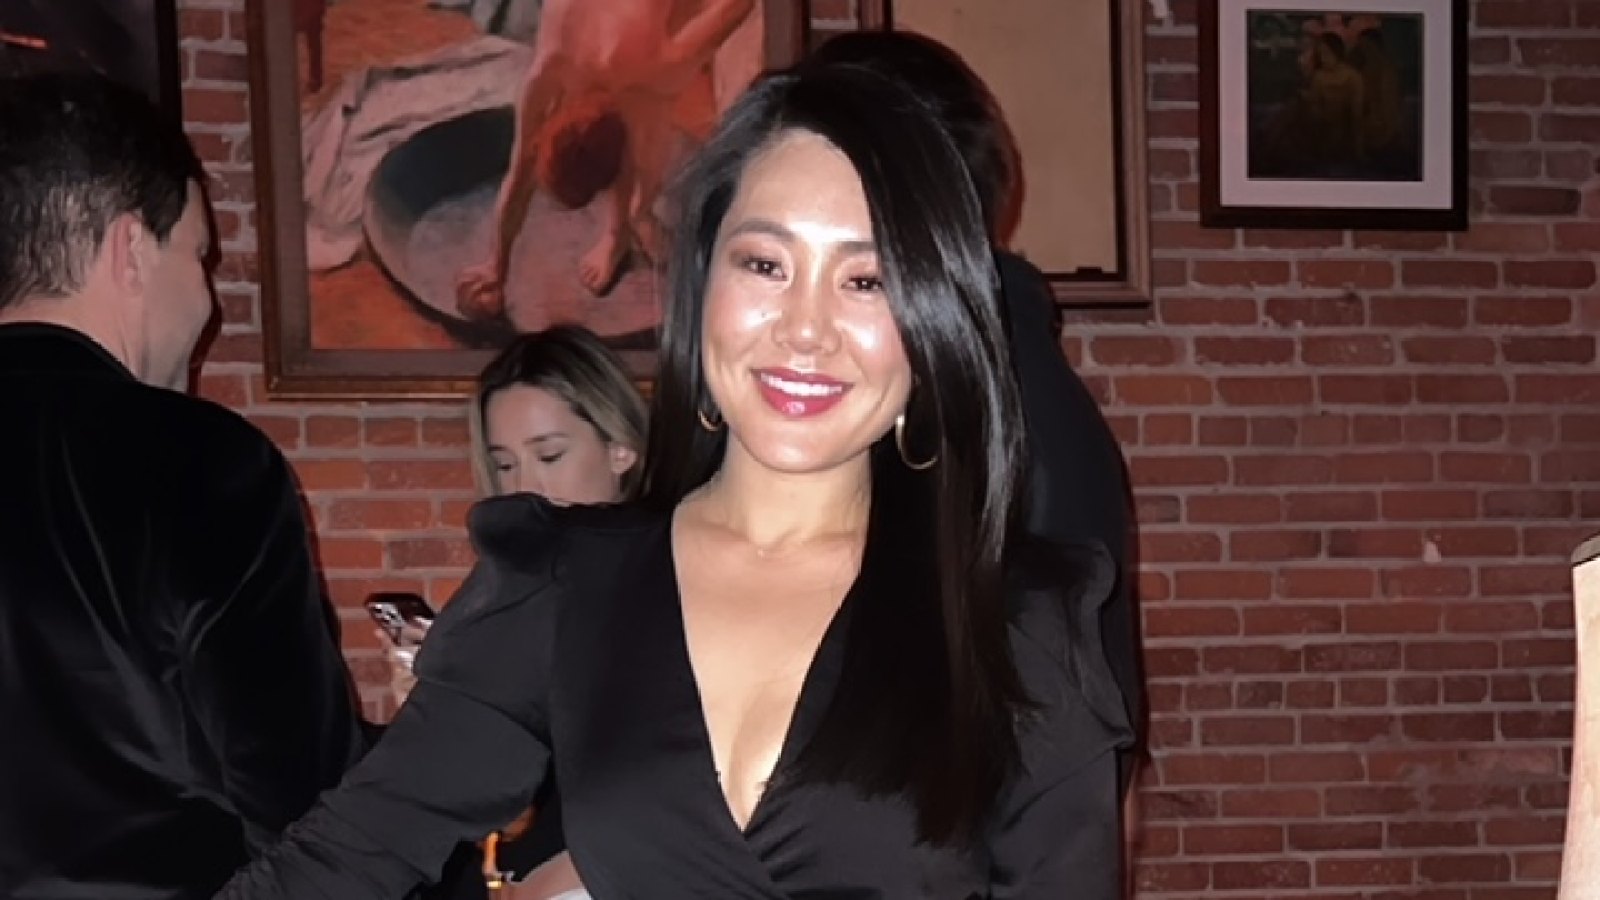 'Real Housewives of Beverly Hills' Star Crystal Kung Minkoff Celebrates 39th Birthday at Warwick